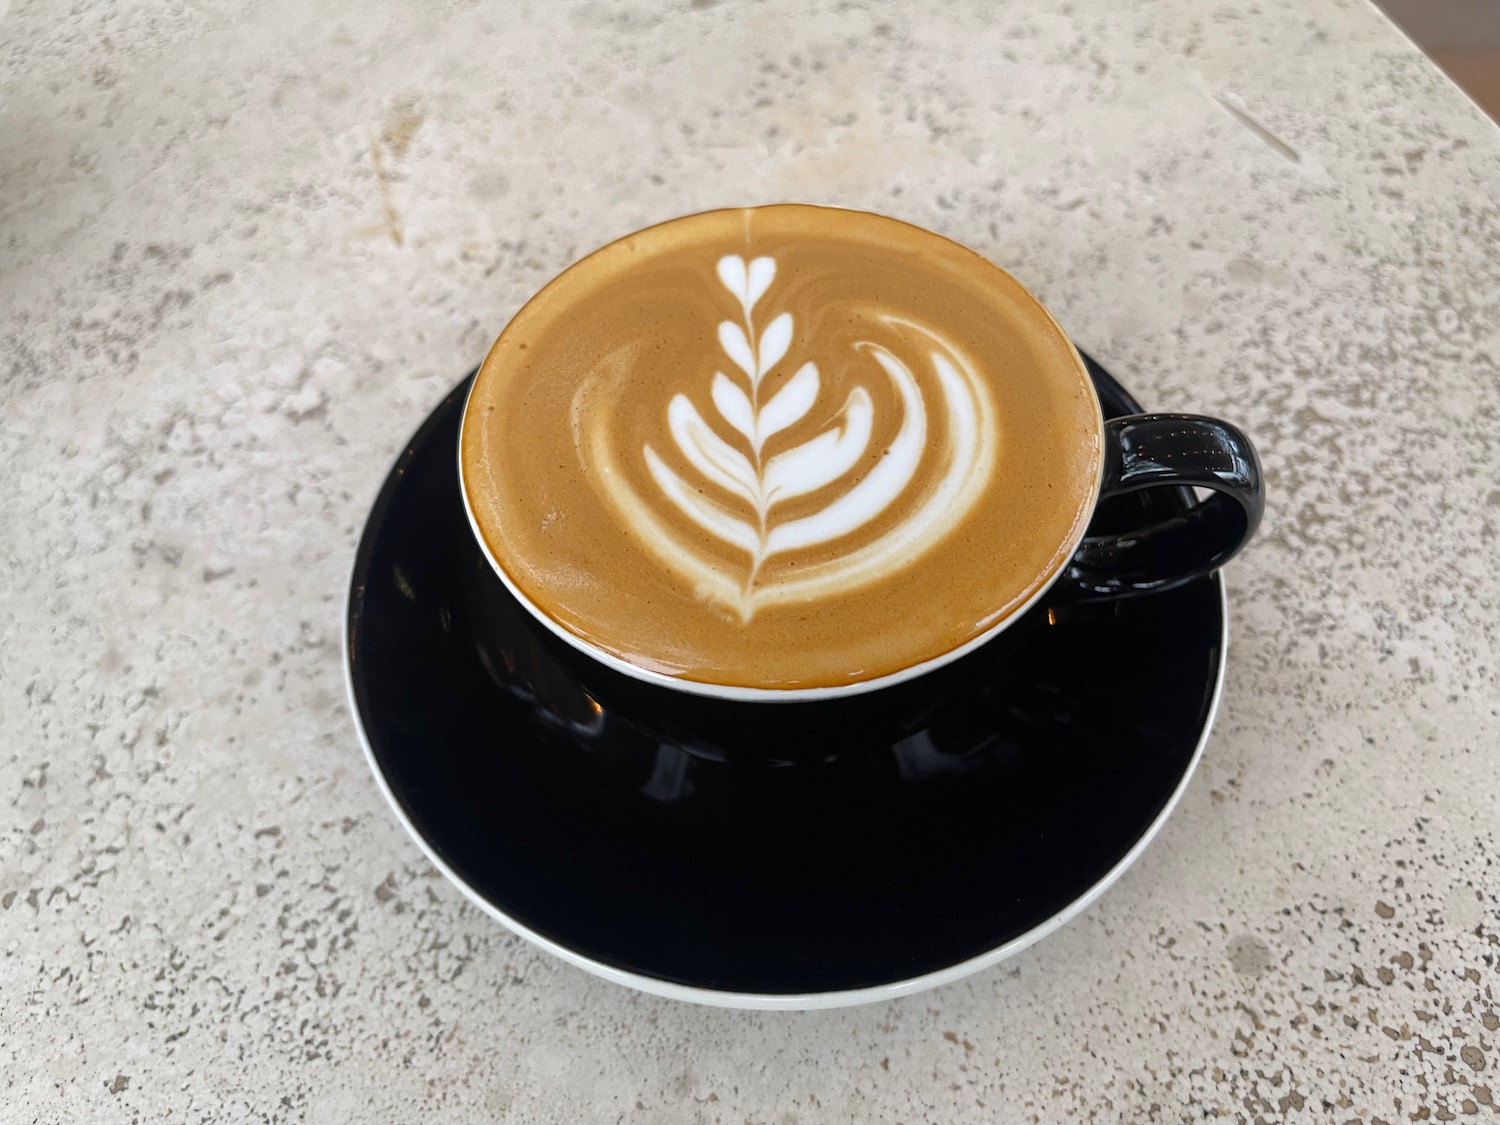 a cup of coffee with a leaf design in the foam